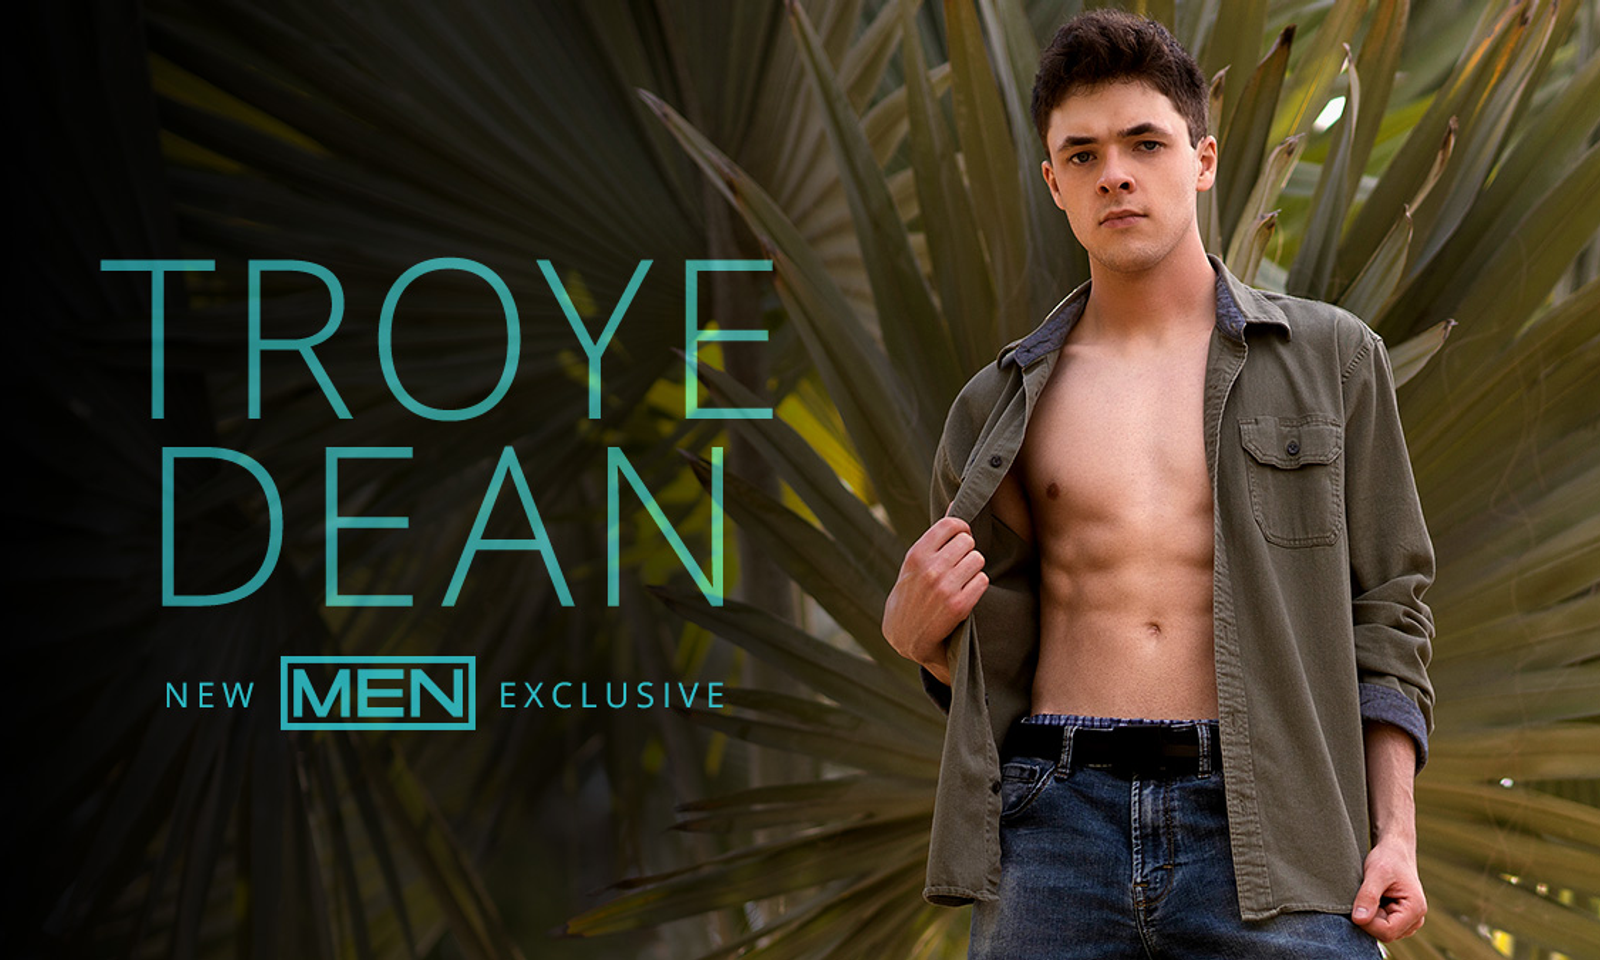 Troye Dean Signs Exclusive Deal With Men.com